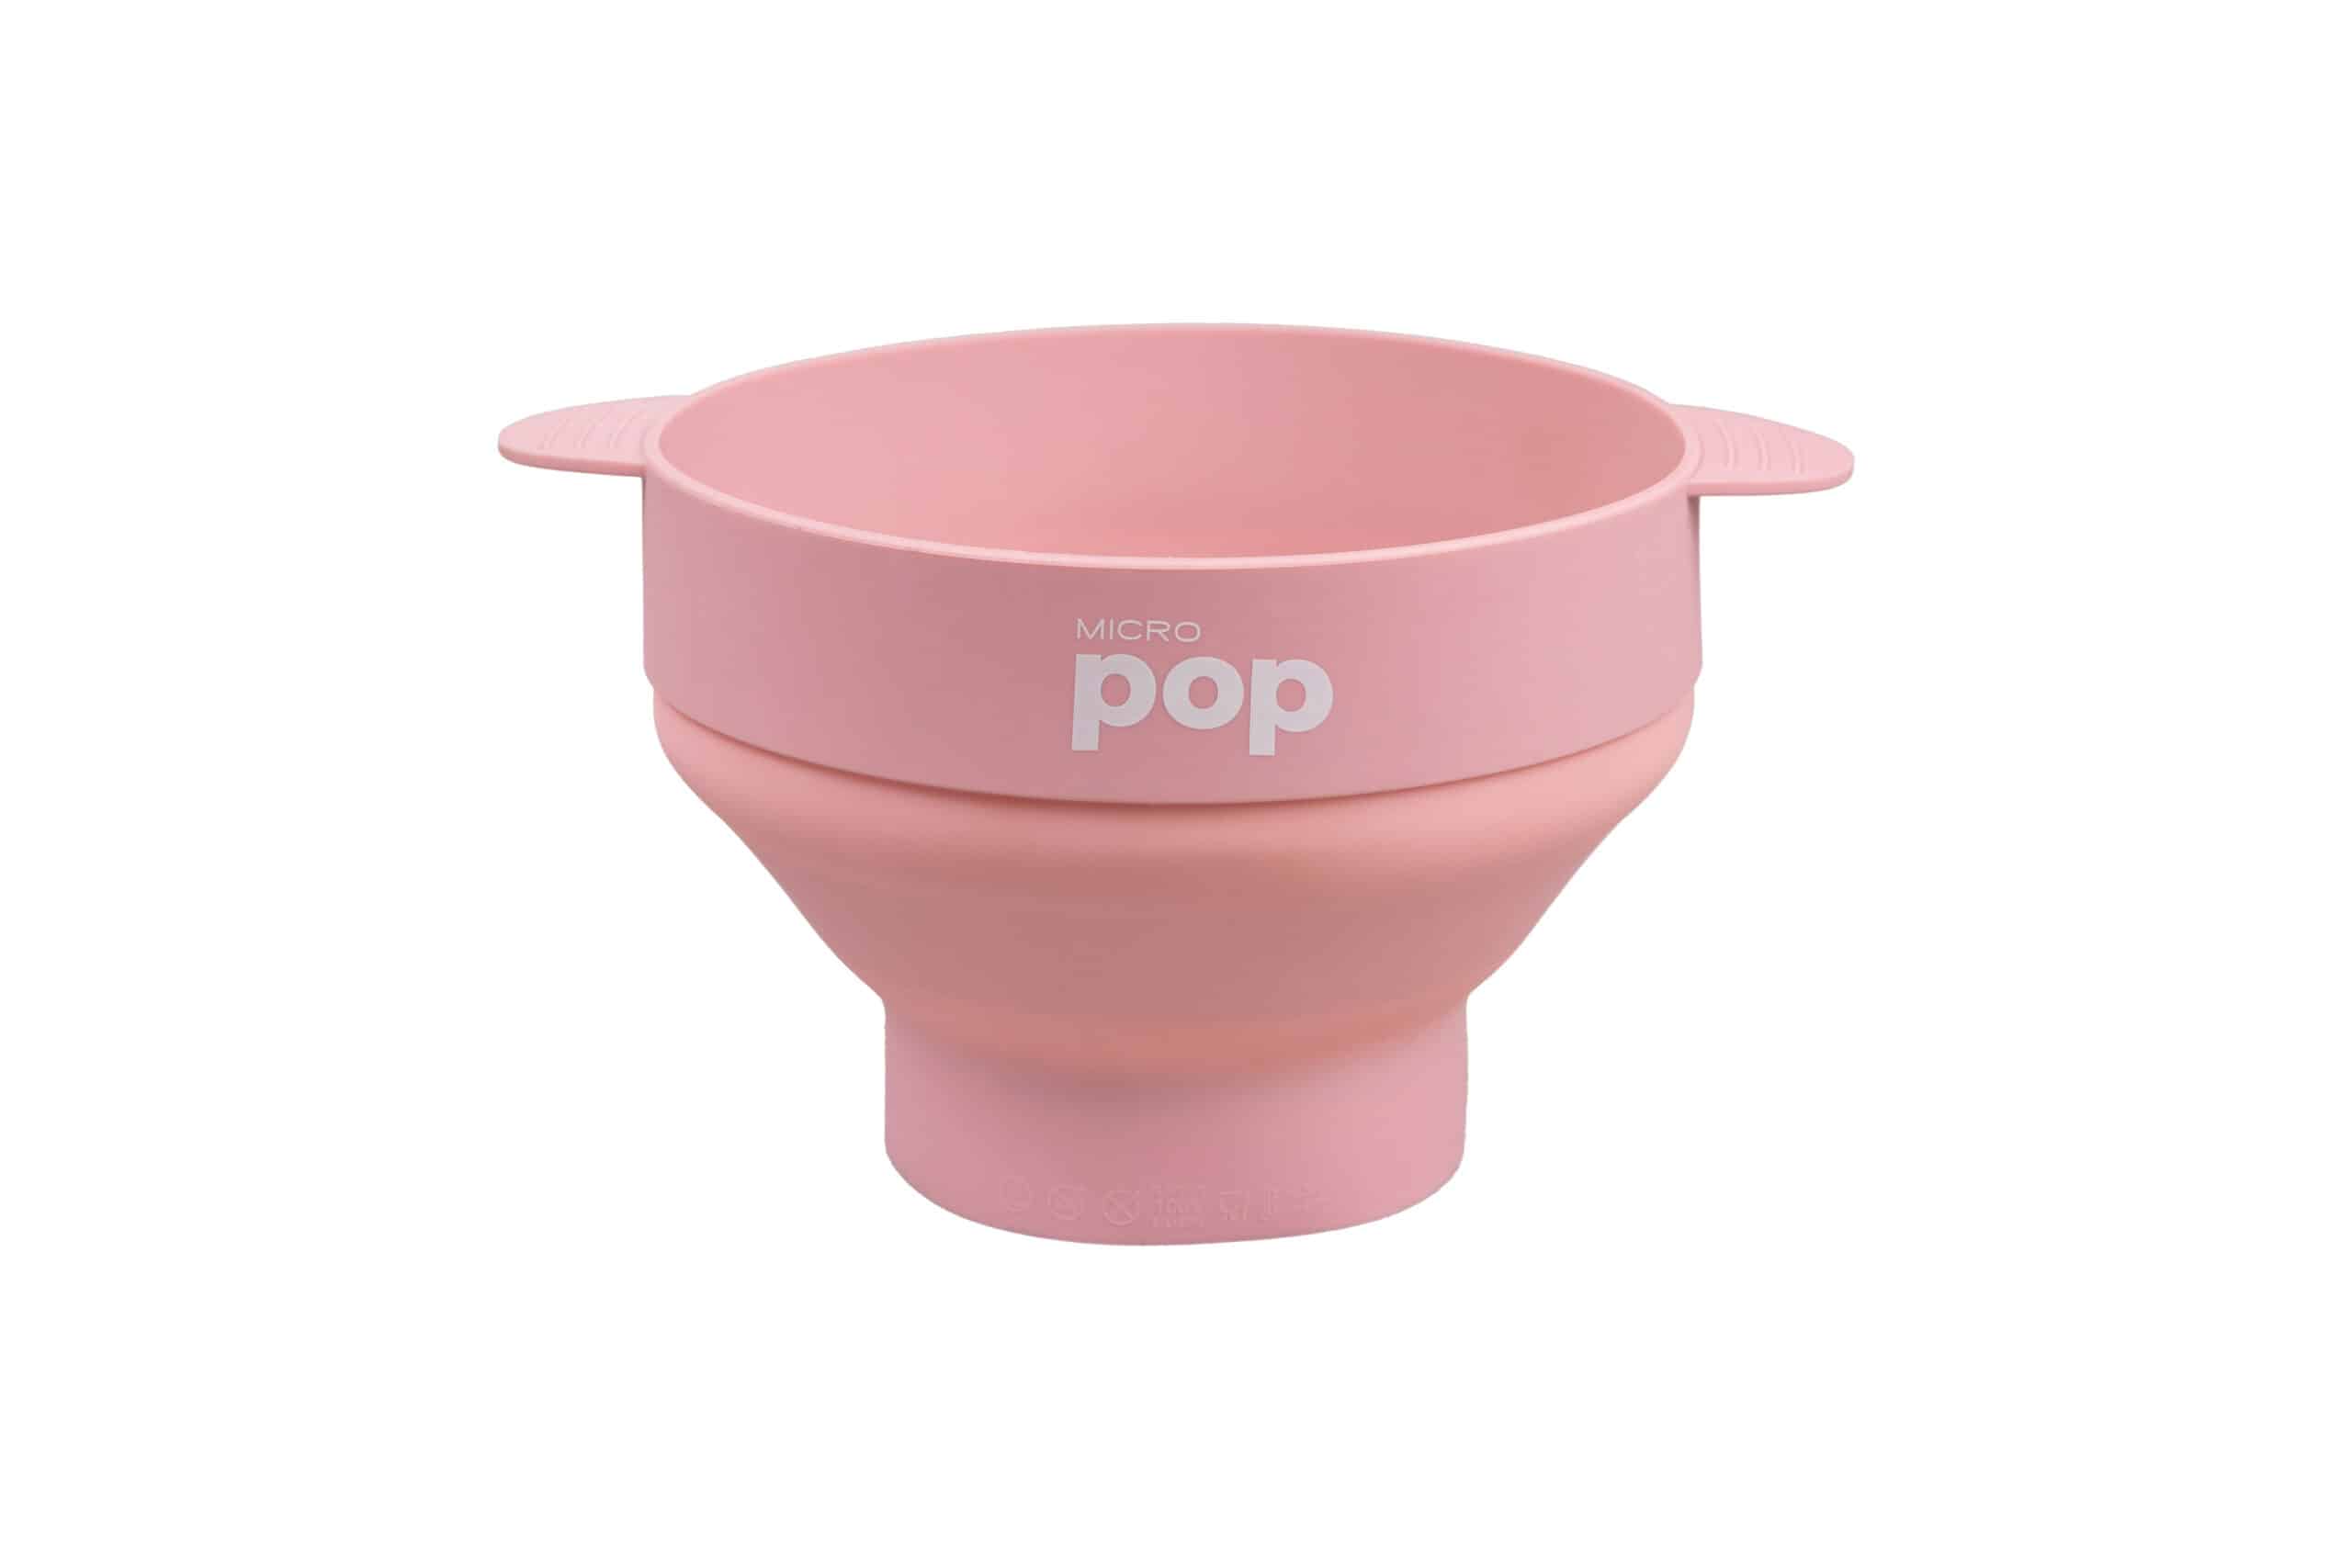 Micro Pop Silicone Microwave Popcorn Popper Pink